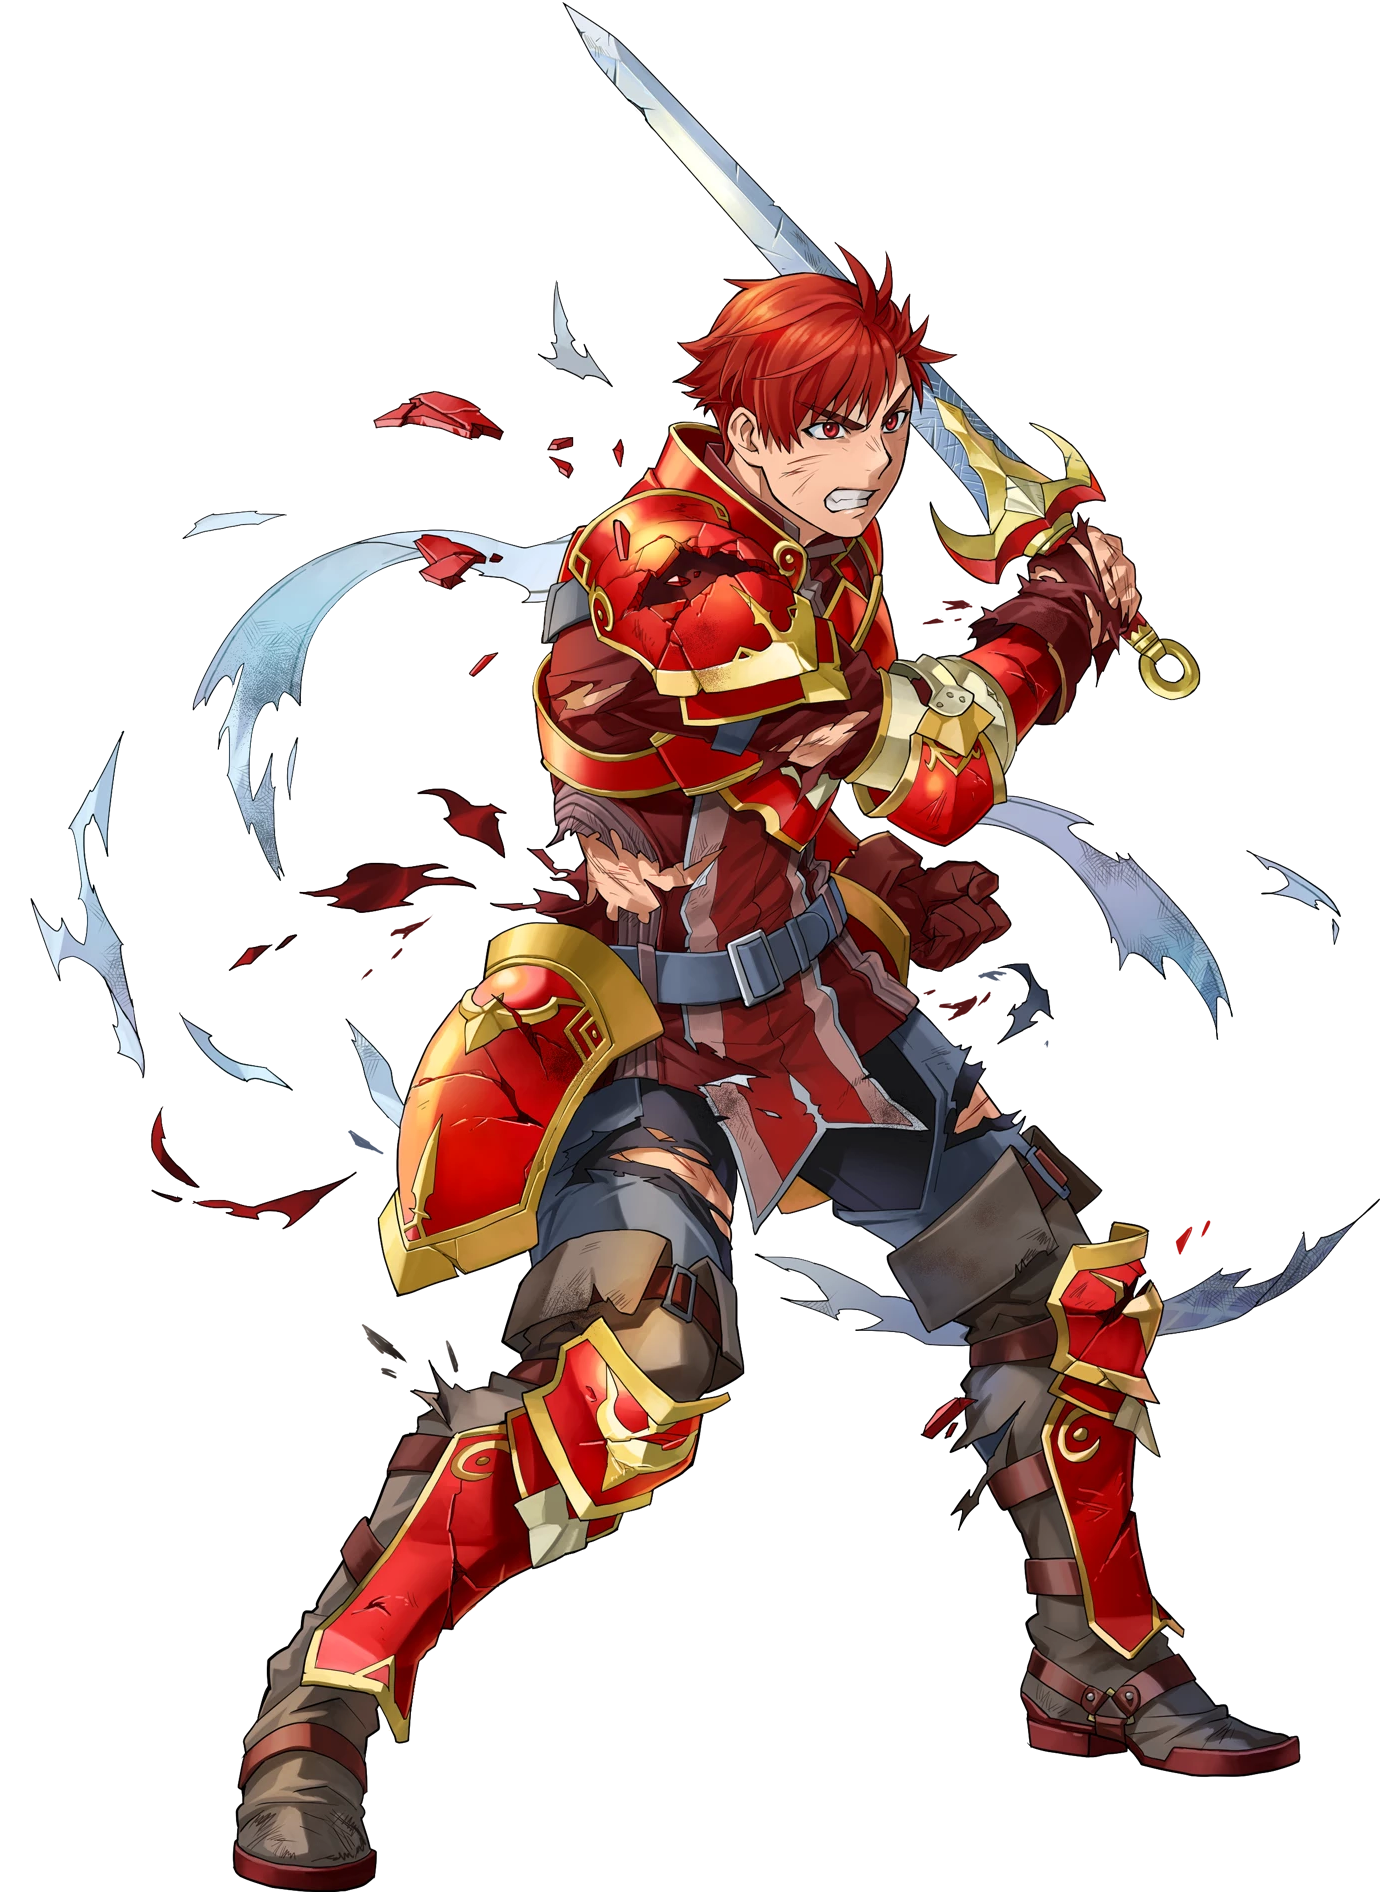 Image - Cain Damaged.png | Fire Emblem Wiki | FANDOM powered by Wikia